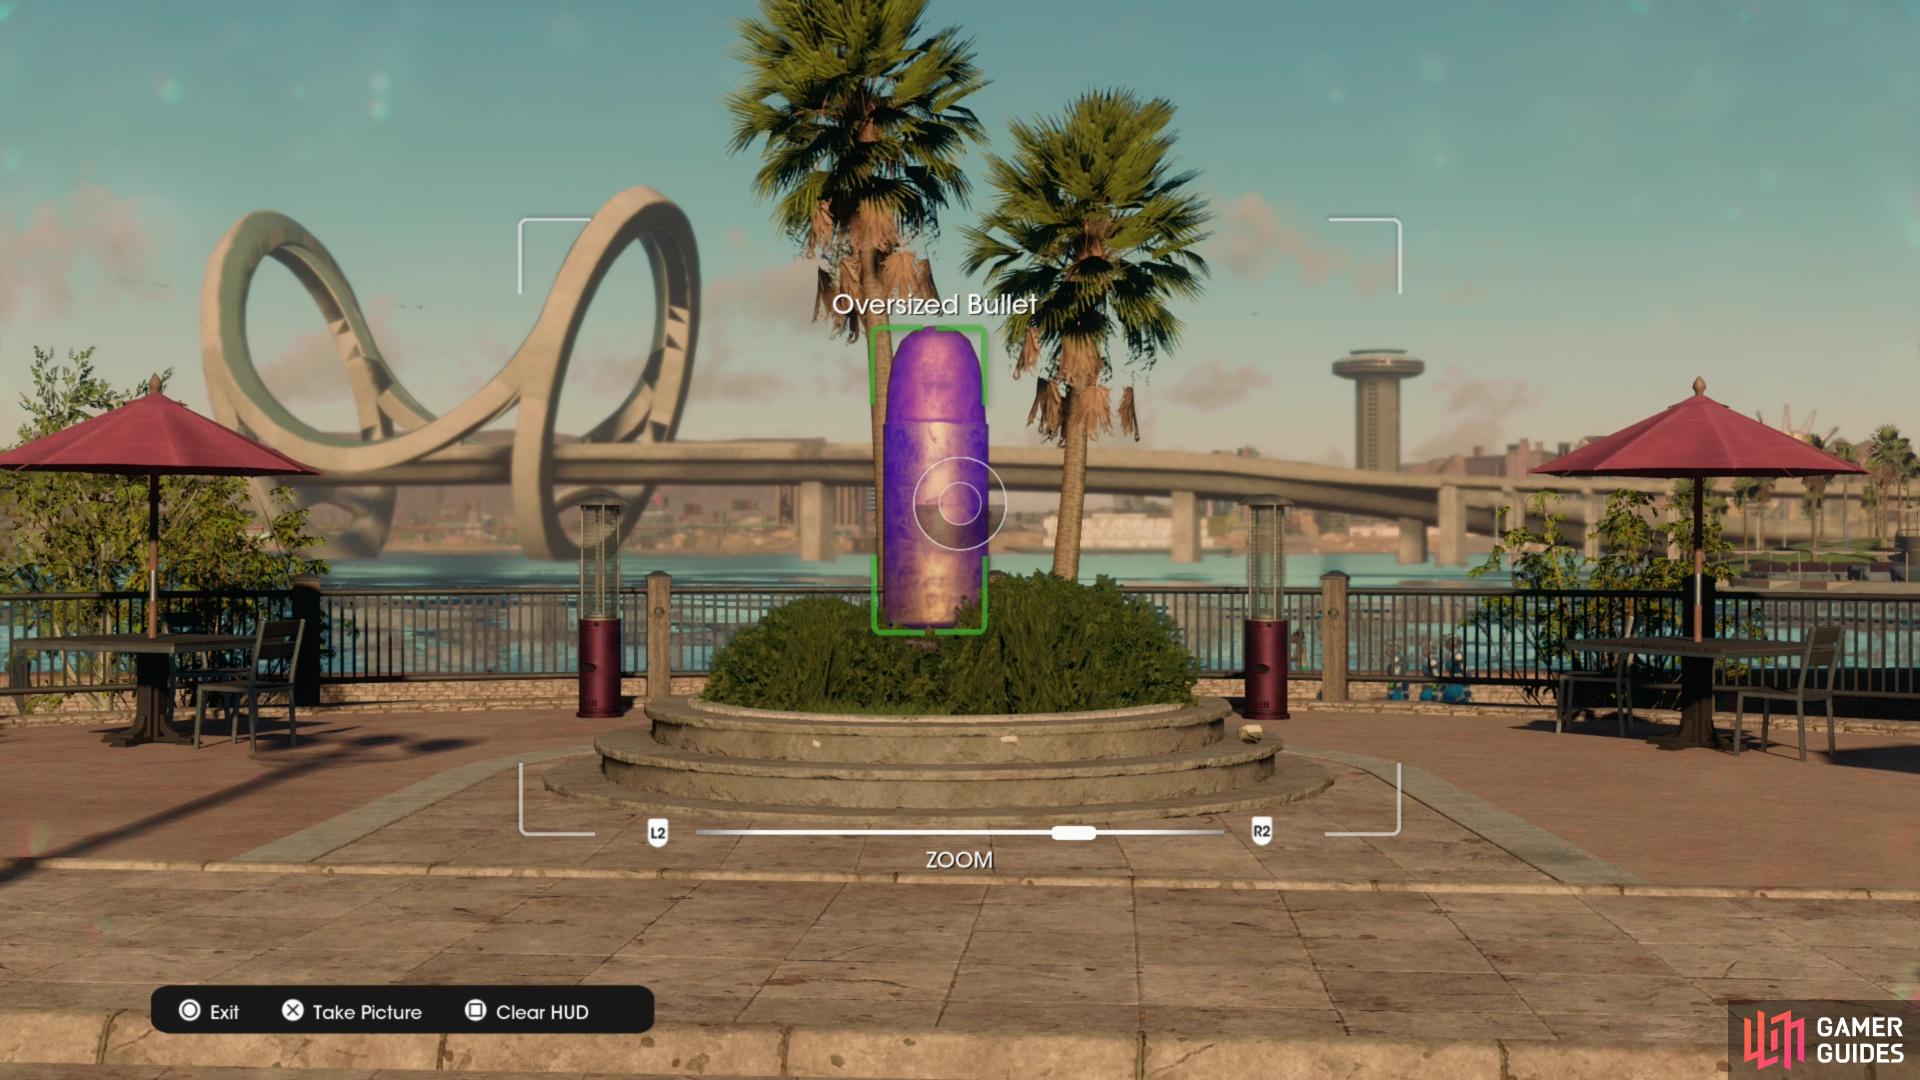 Take a picture of the Oversized Bullet collectible to obtain it.